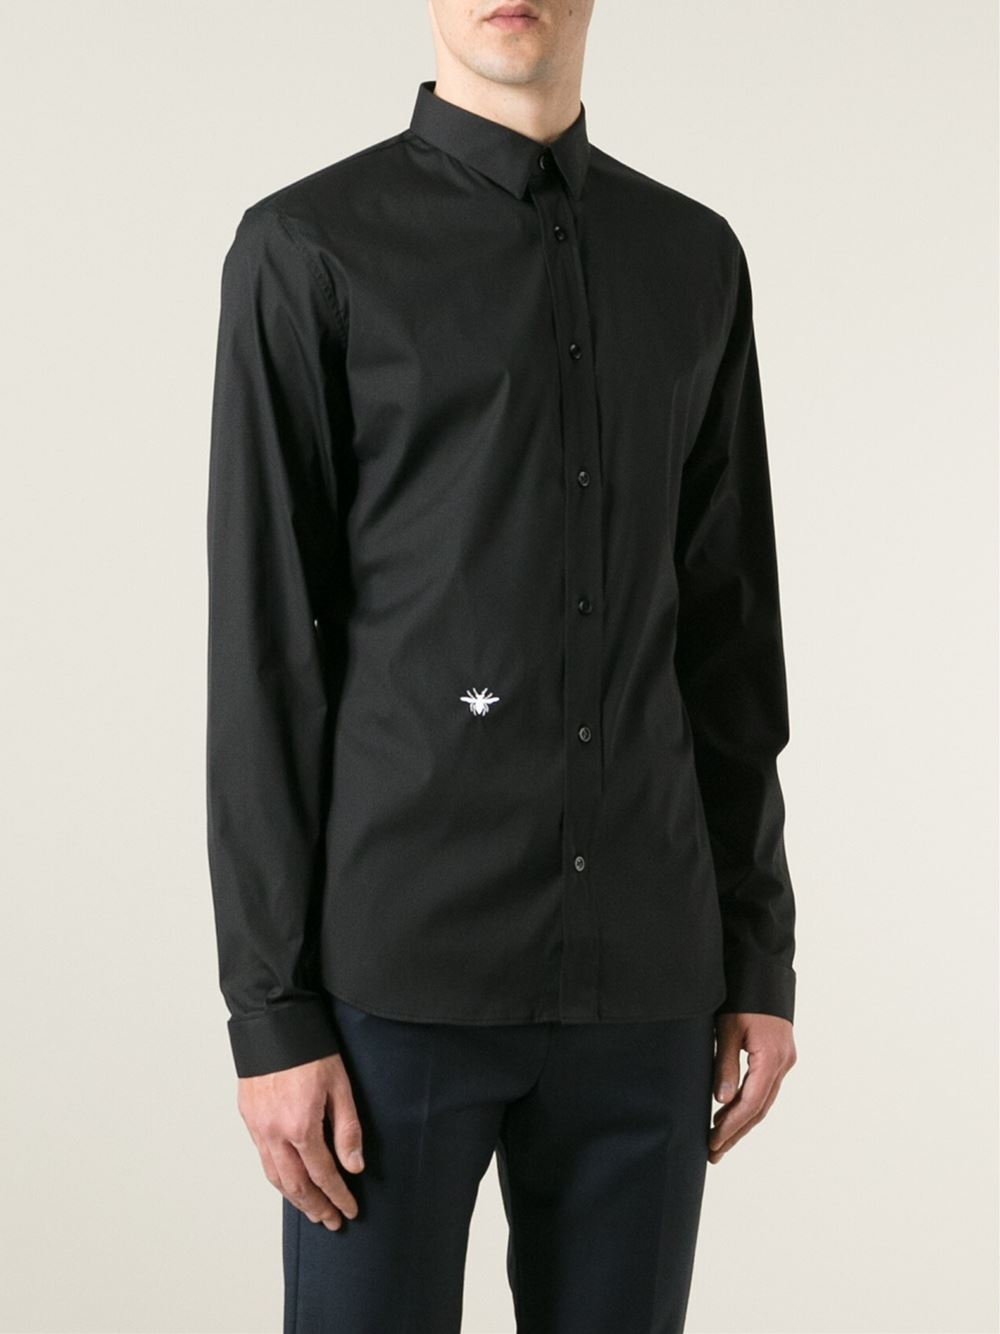 Dior Homme Embroidered Bee Shirt in Black for Men | Lyst